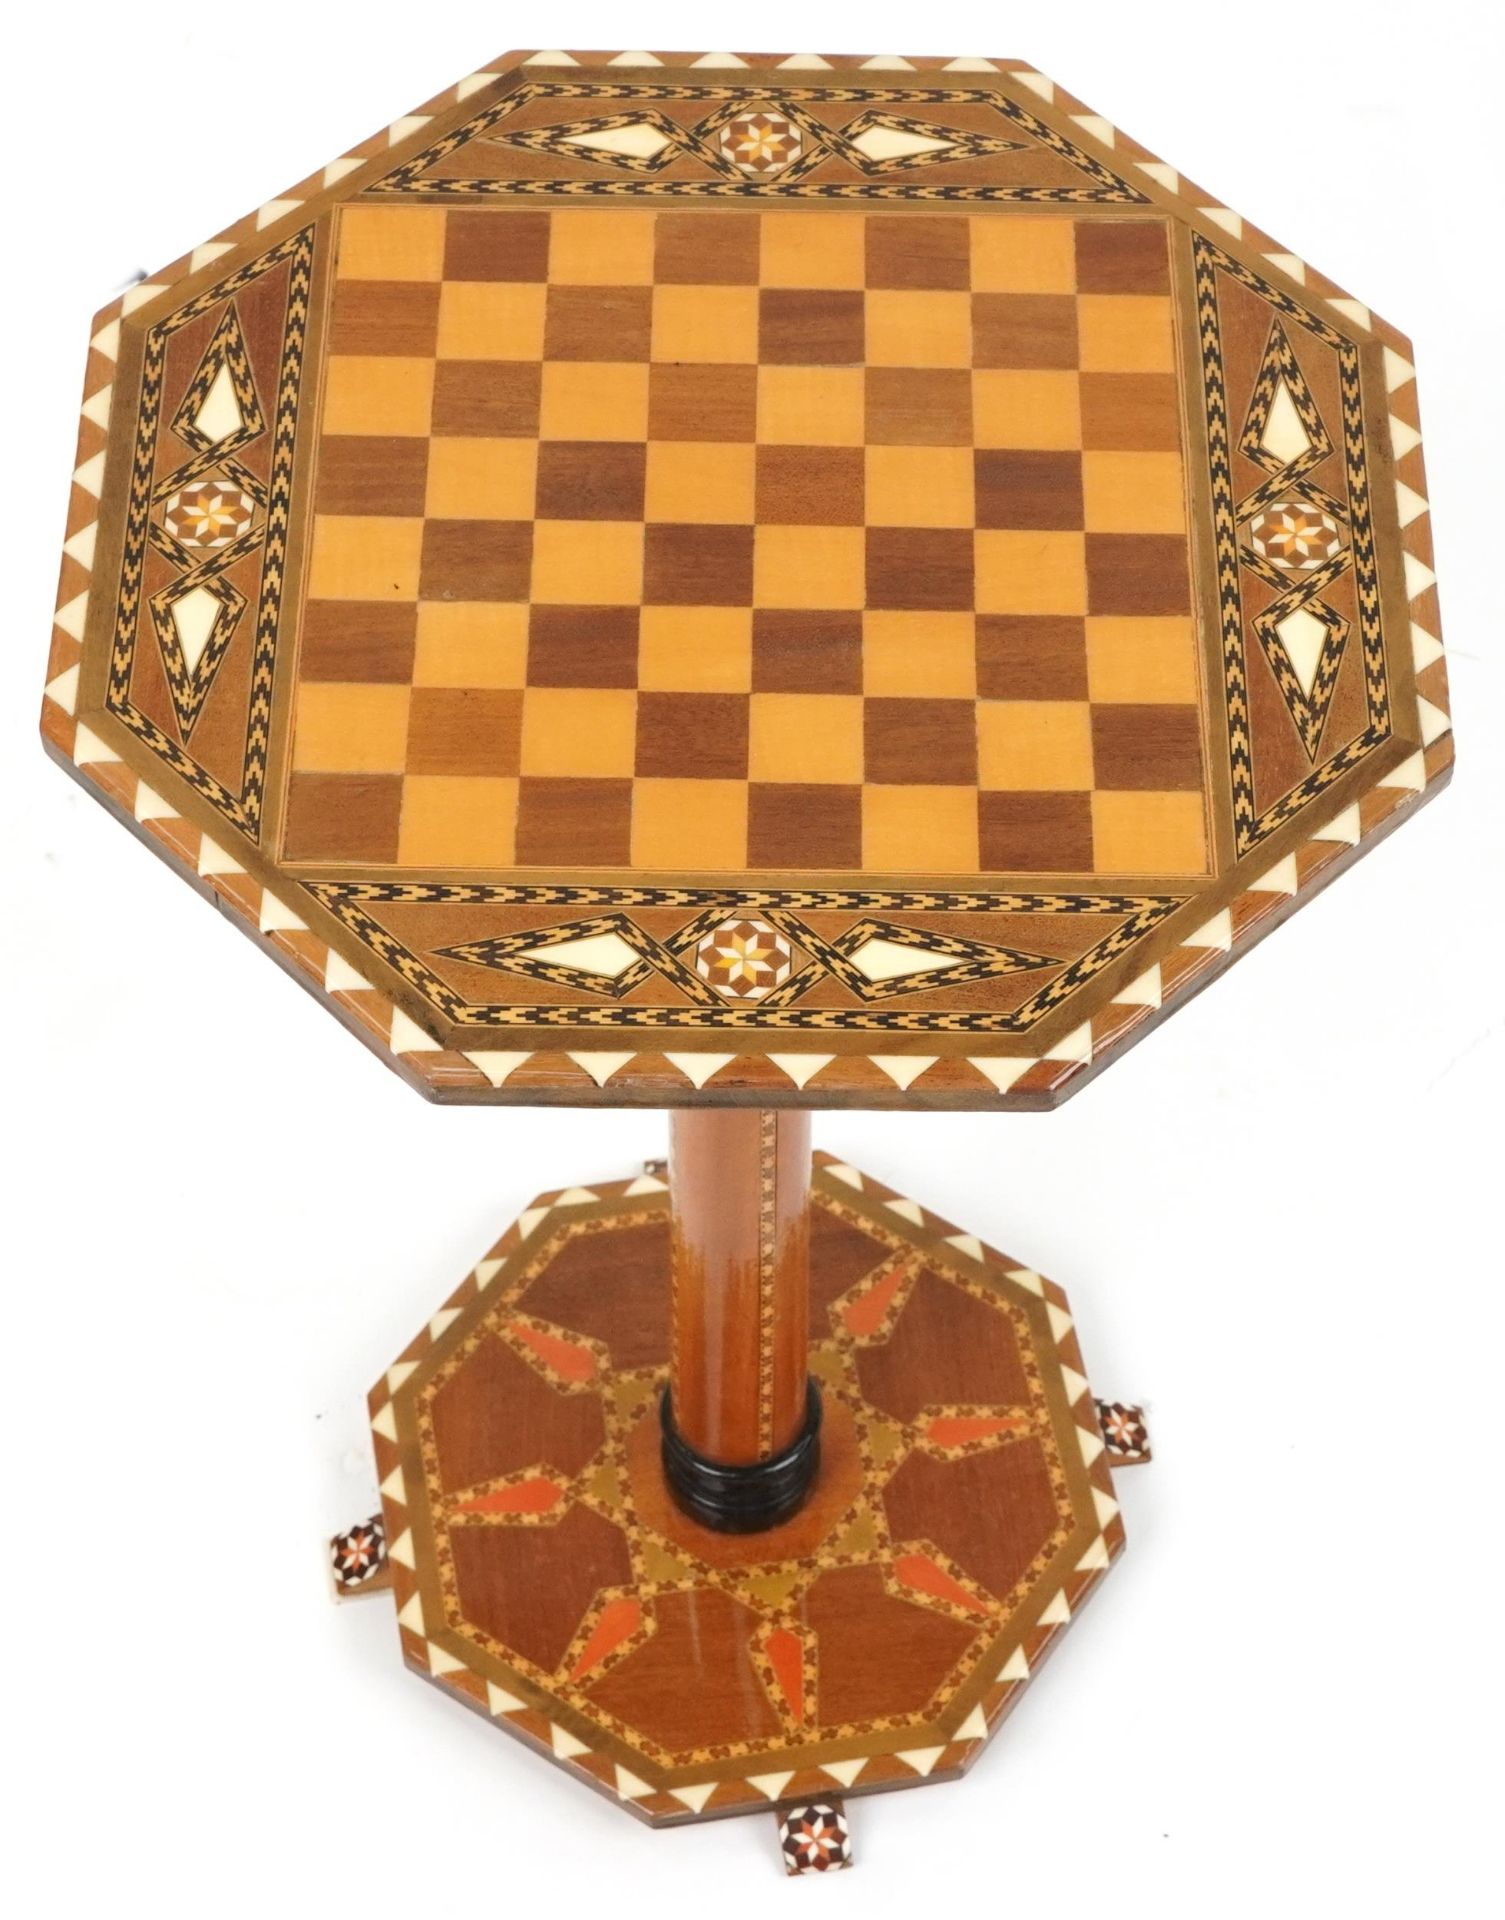 Manner of Liberty & Co, Moorish style inlaid chess occasional table with octagonal top and base, - Bild 2 aus 3